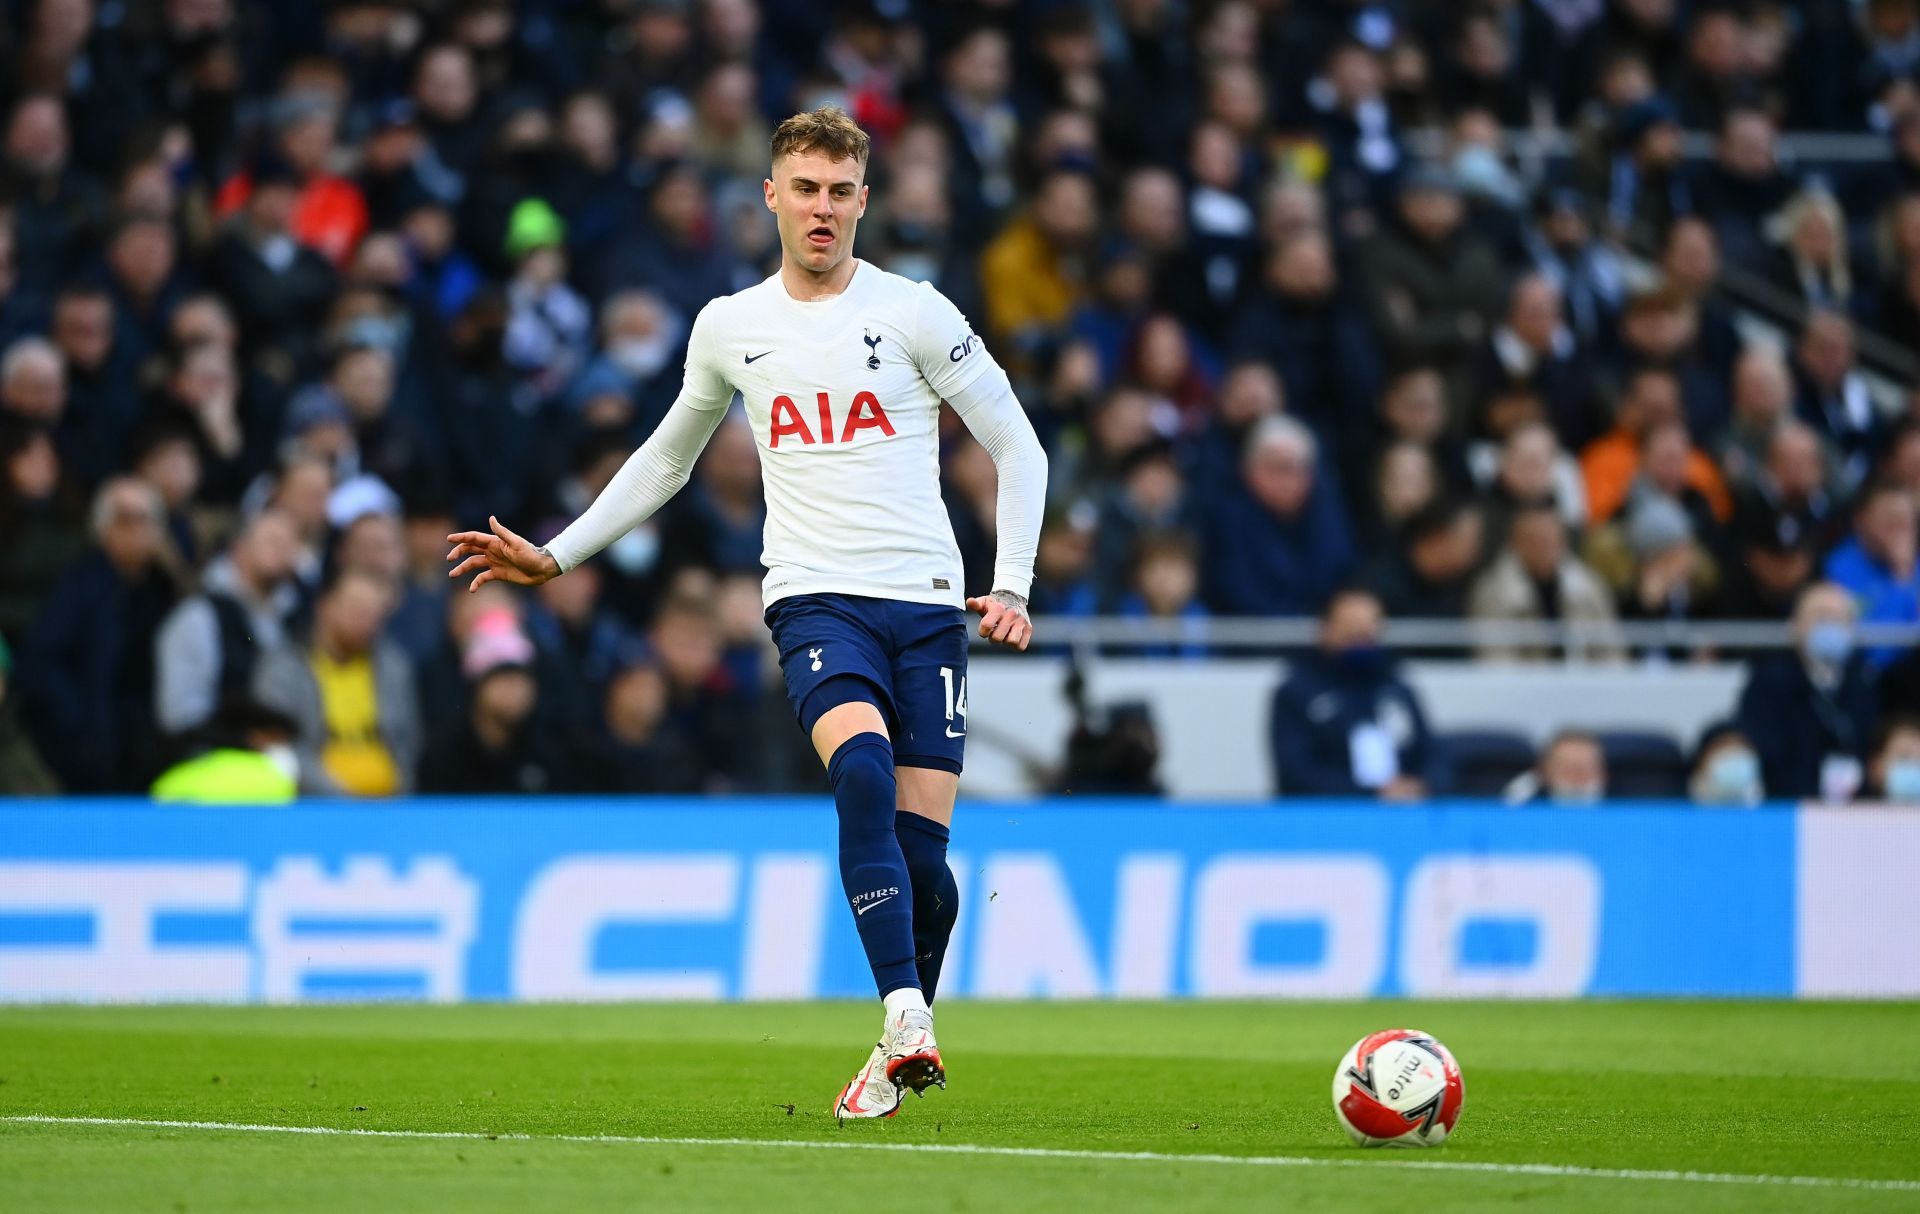 Rodon made his first Spurs start against Chelsea